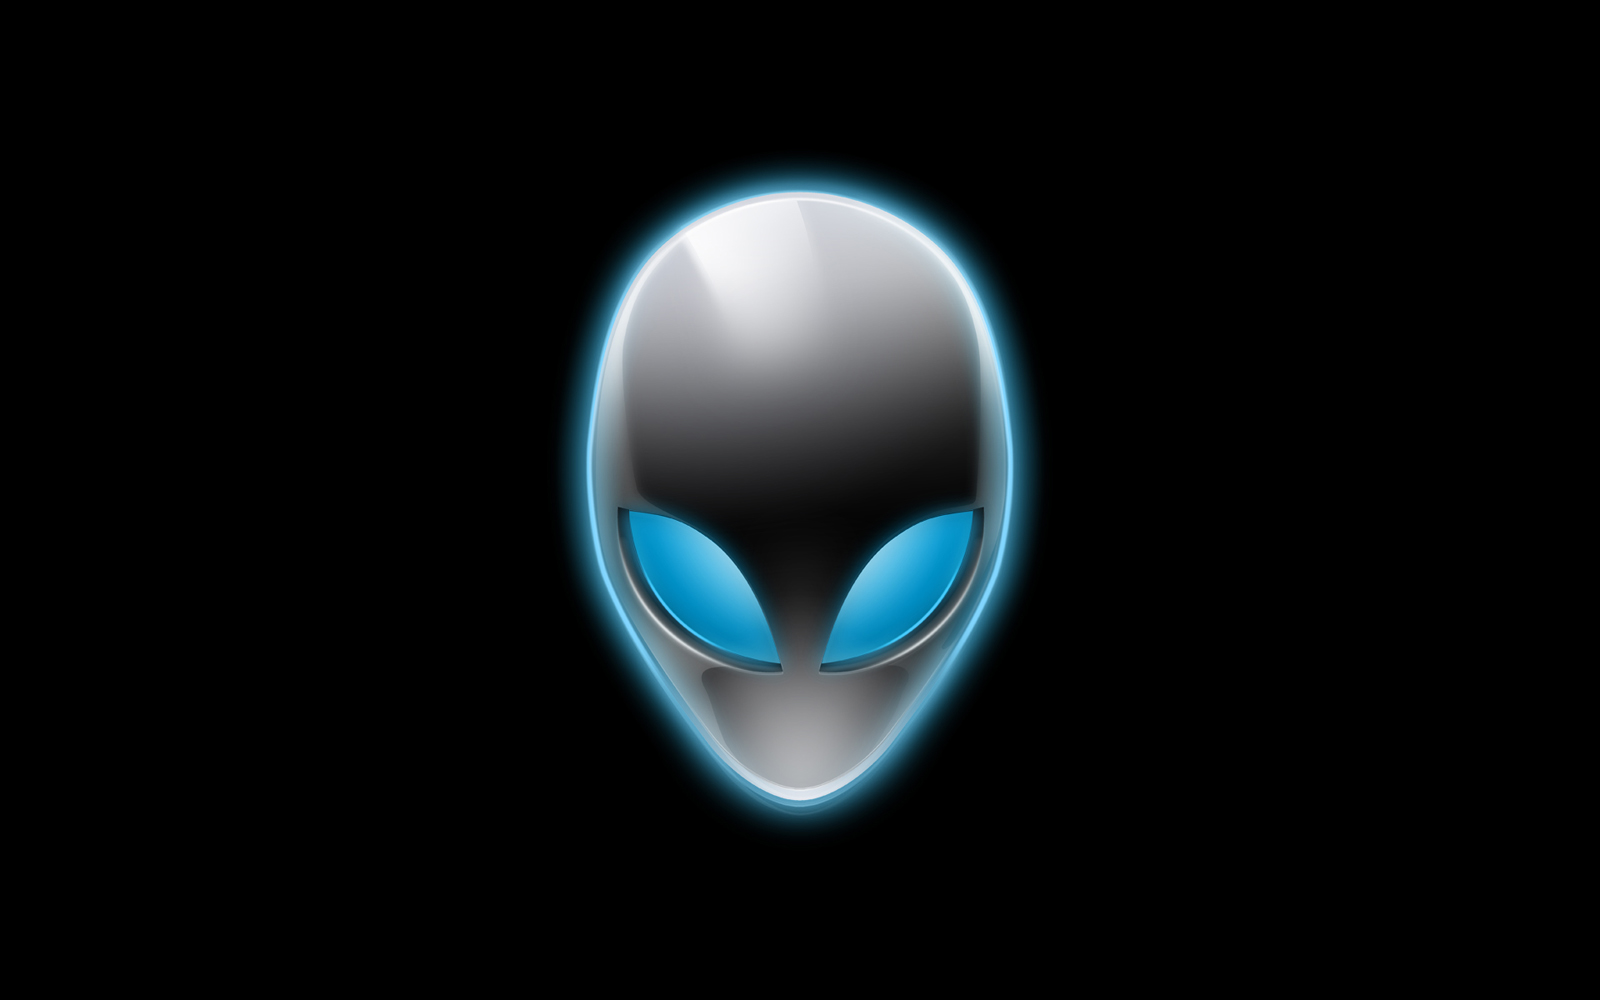 Alienware Logos and HD Wallpapers Download Wallpapers in HD for 1600x1000